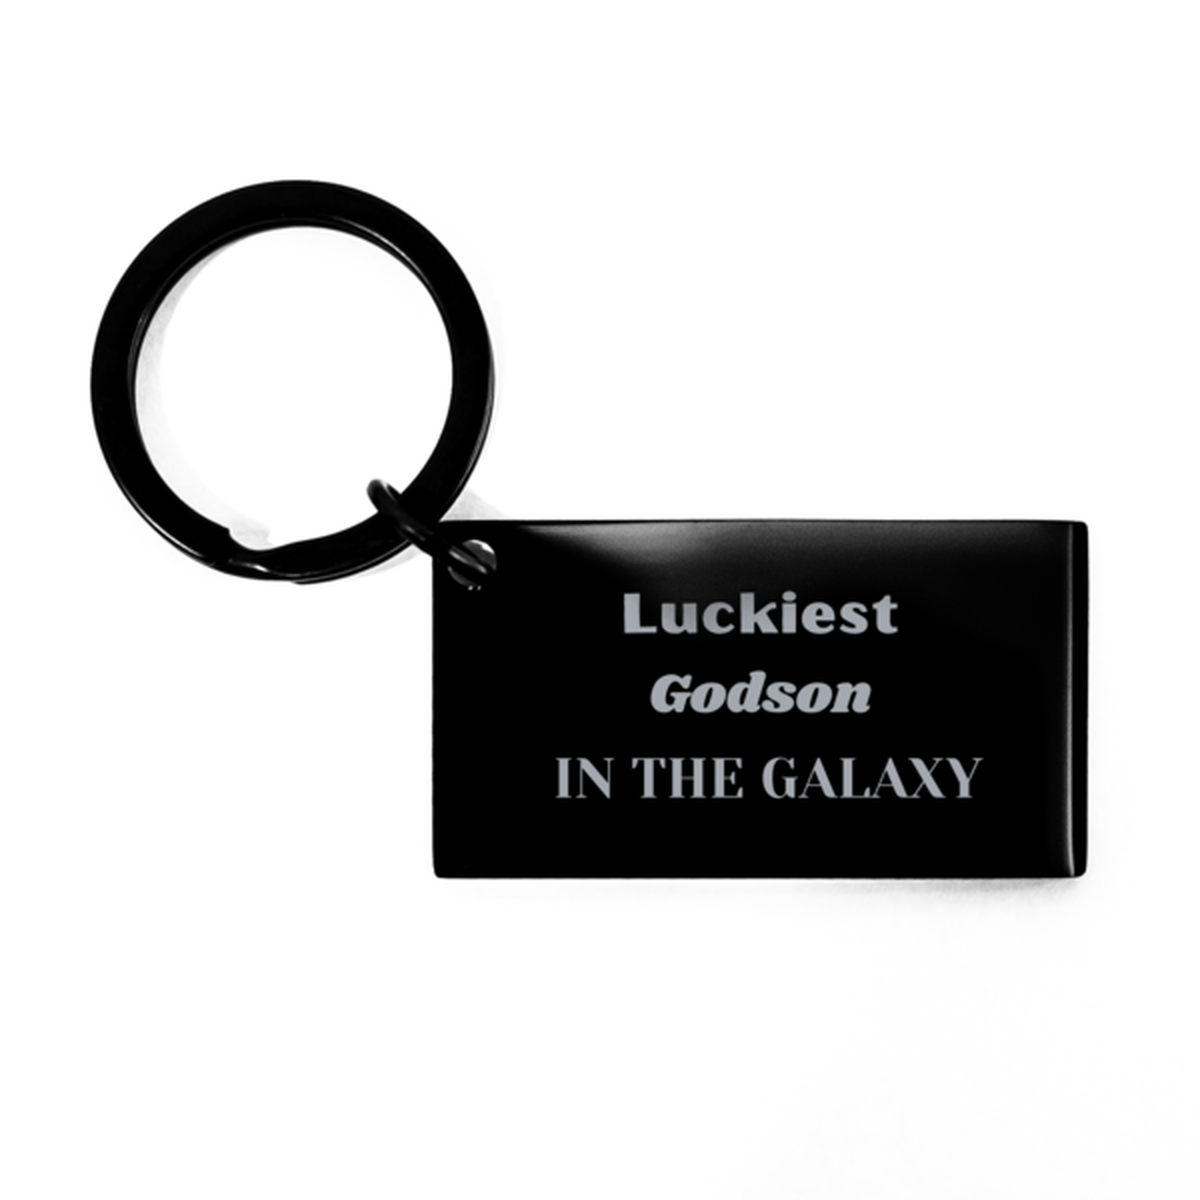 Luckiest Godson in the Galaxy, To My Godson Engraved Gifts, Christmas Godson Keychain Gifts, X-mas Birthday Unique Gifts For Godson Men Women